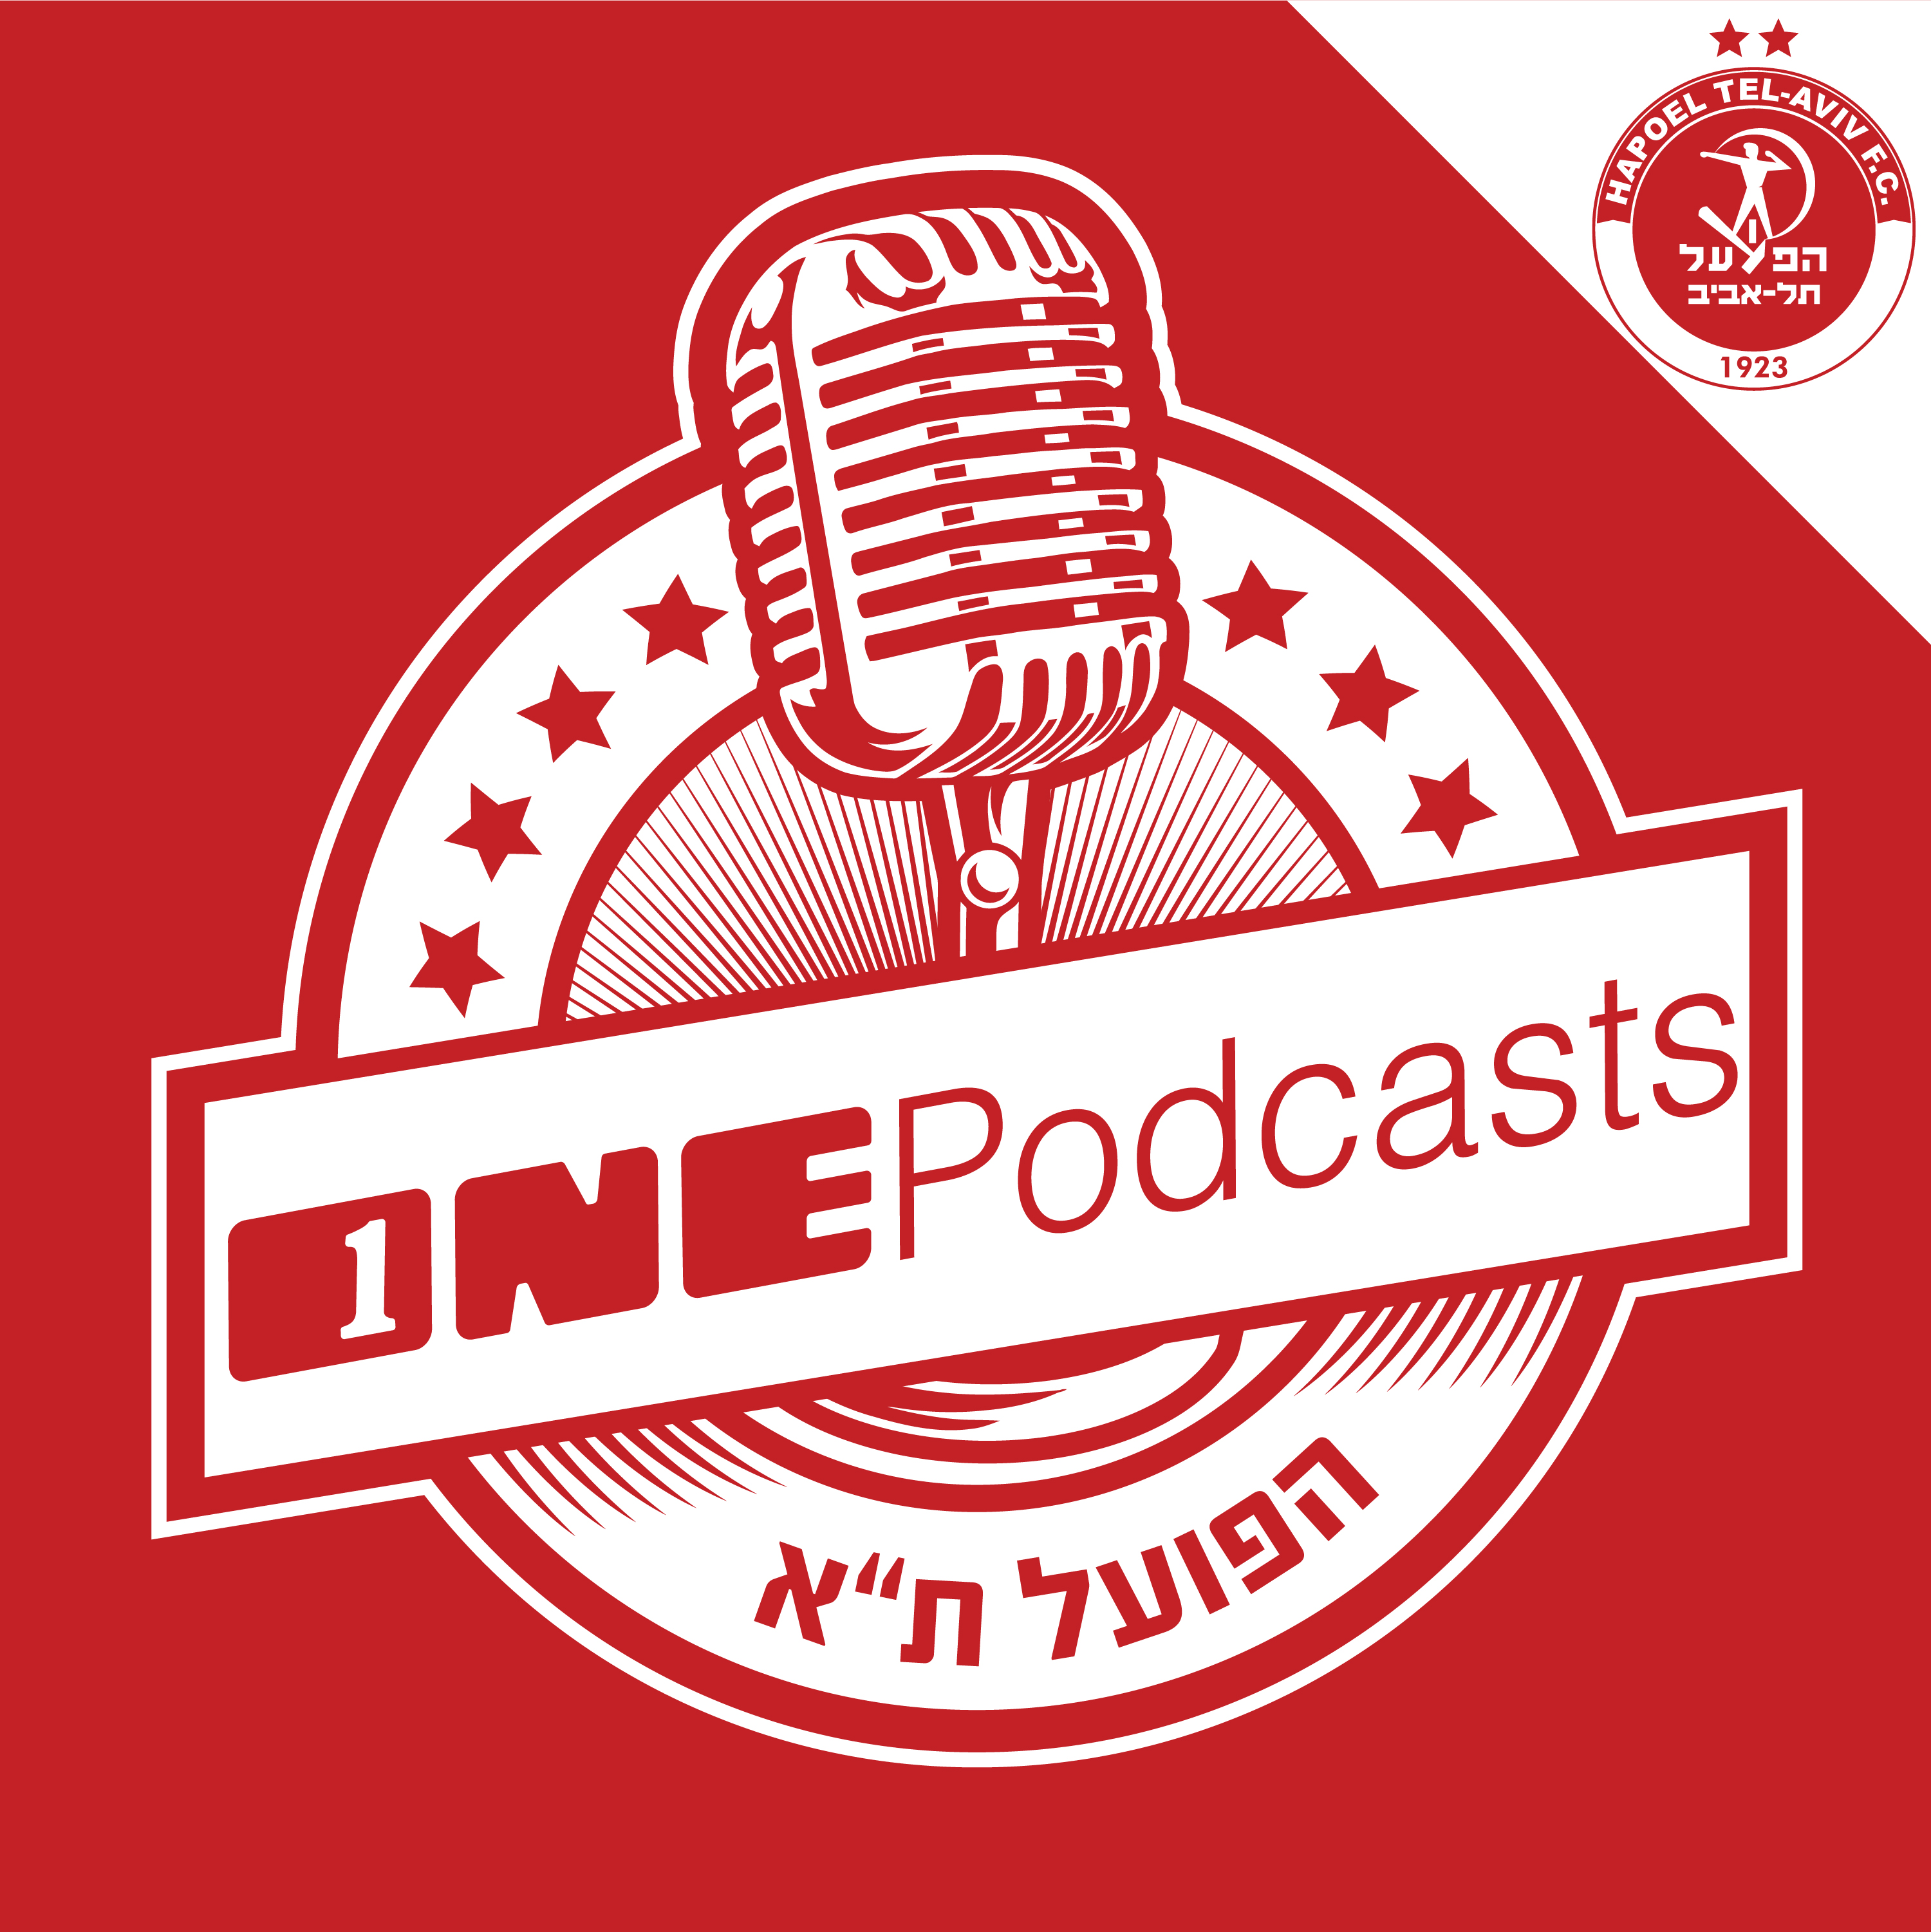 ONE Podcasts - הפועל תל אביב